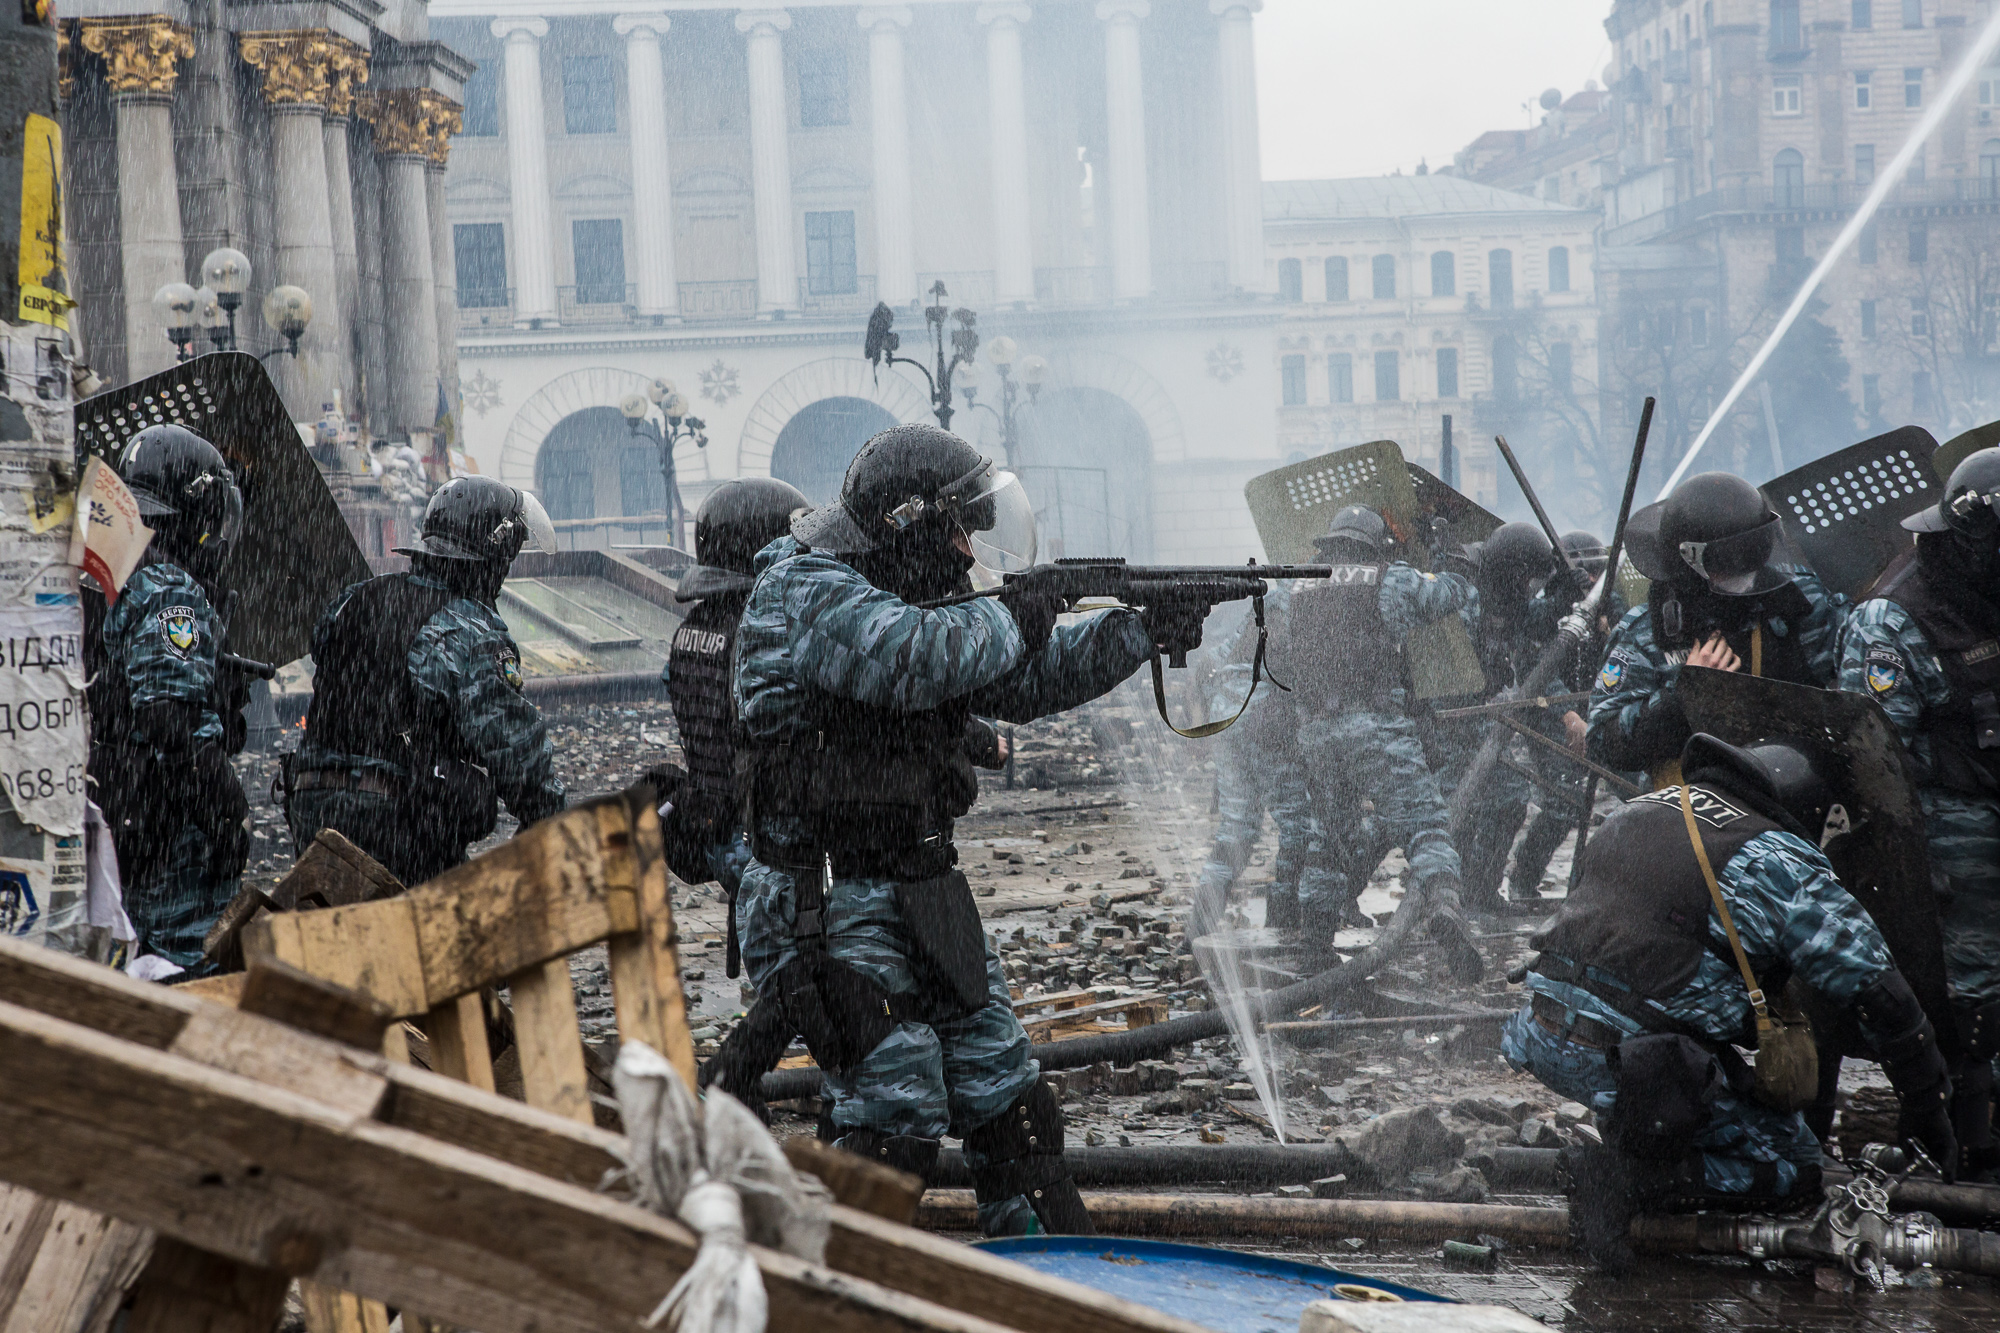  Berkut riot police shoot rubber bullets toward anti-government protesters on Independence Square on February 19, 2014 in Kiev, Ukraine. After several weeks of calm, violence has again flared between anti-government protesters and police as the Ukrai